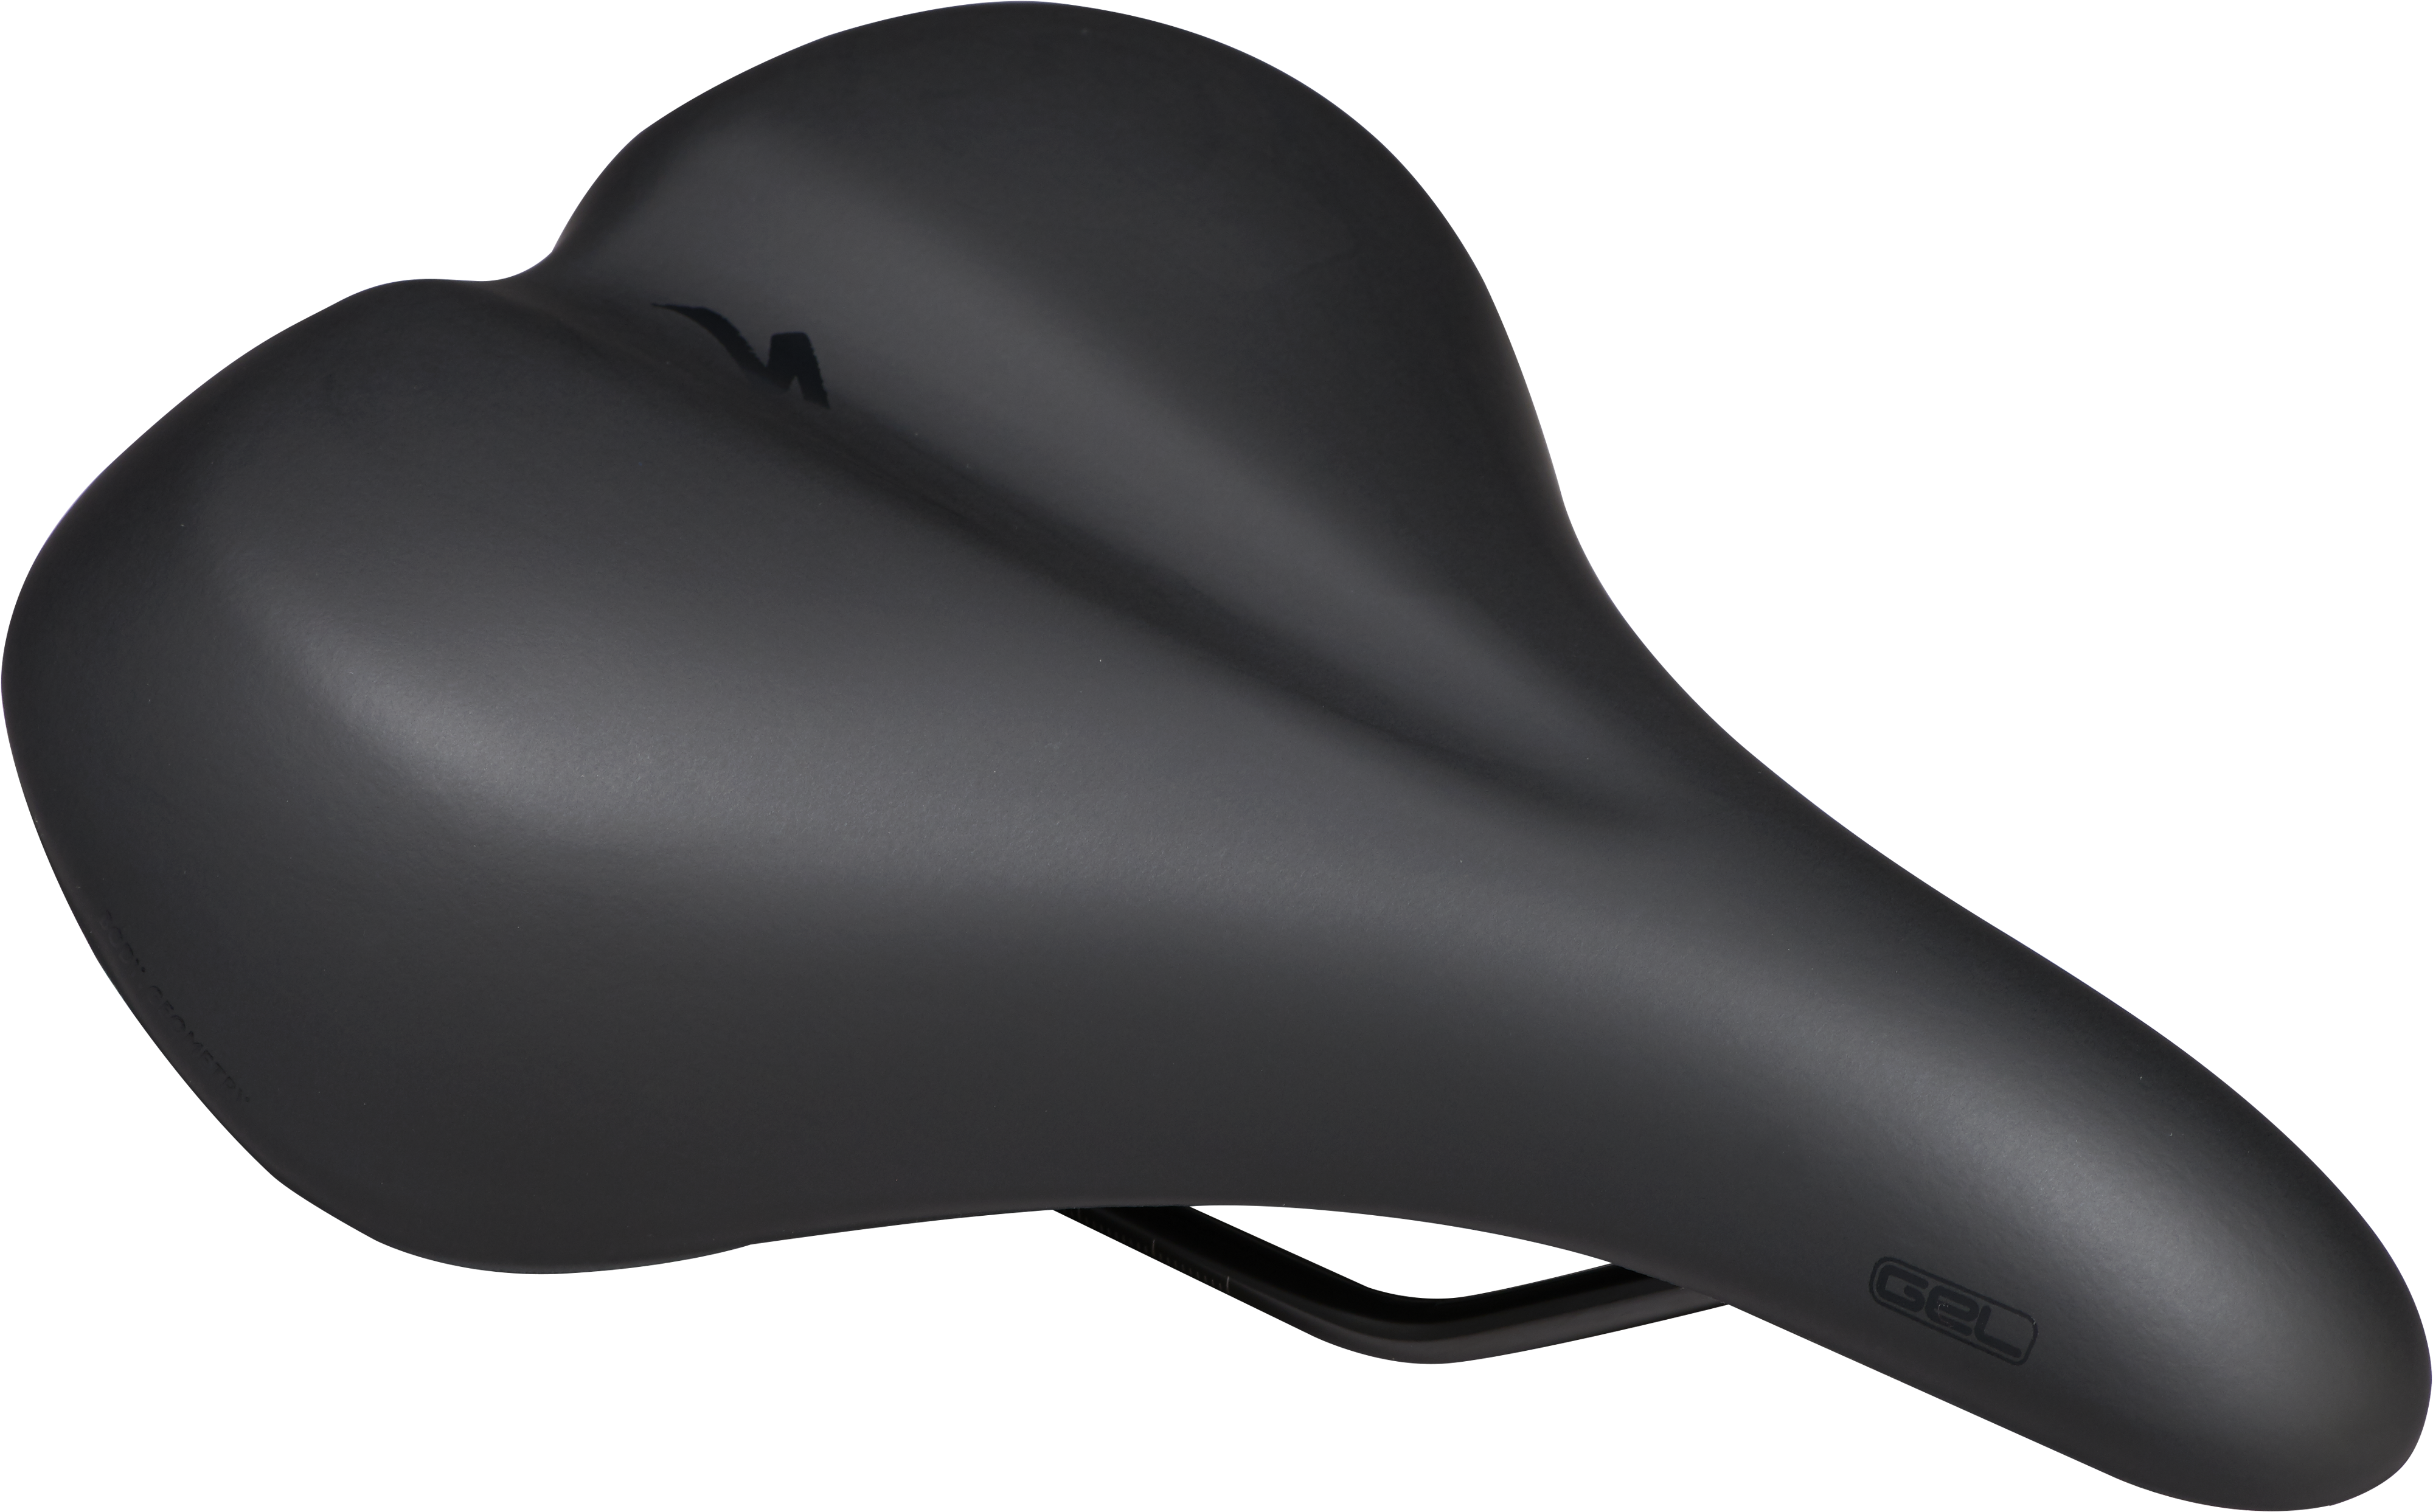 SPECIALIZED selle vélo Body Geometry Comfort Gel CYCLES ET SPORTS